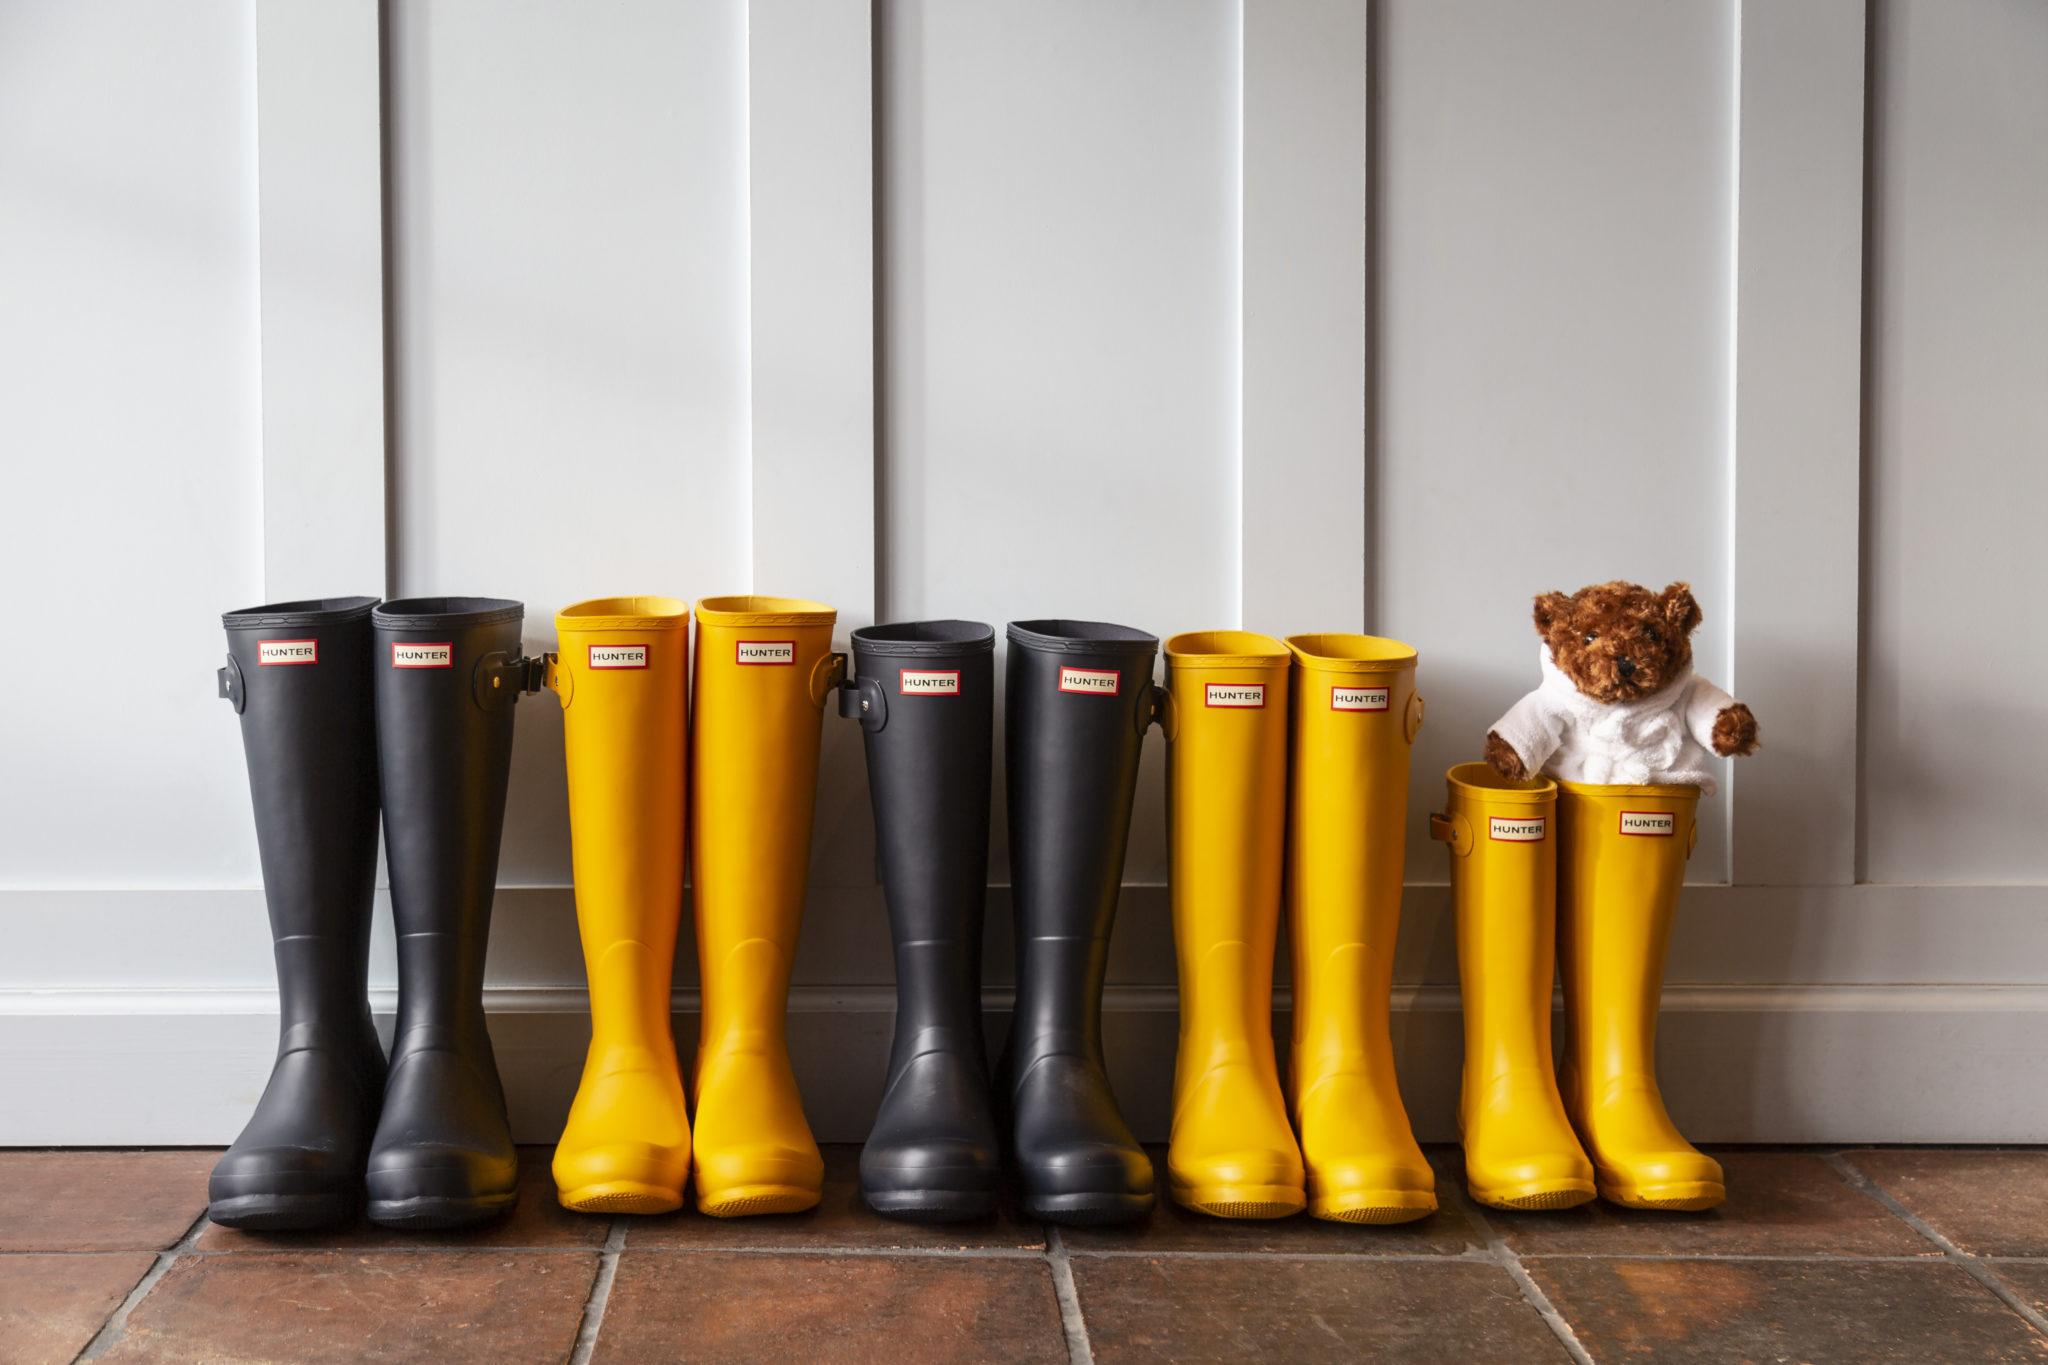 Hunter Wellington Boots now available from Reception